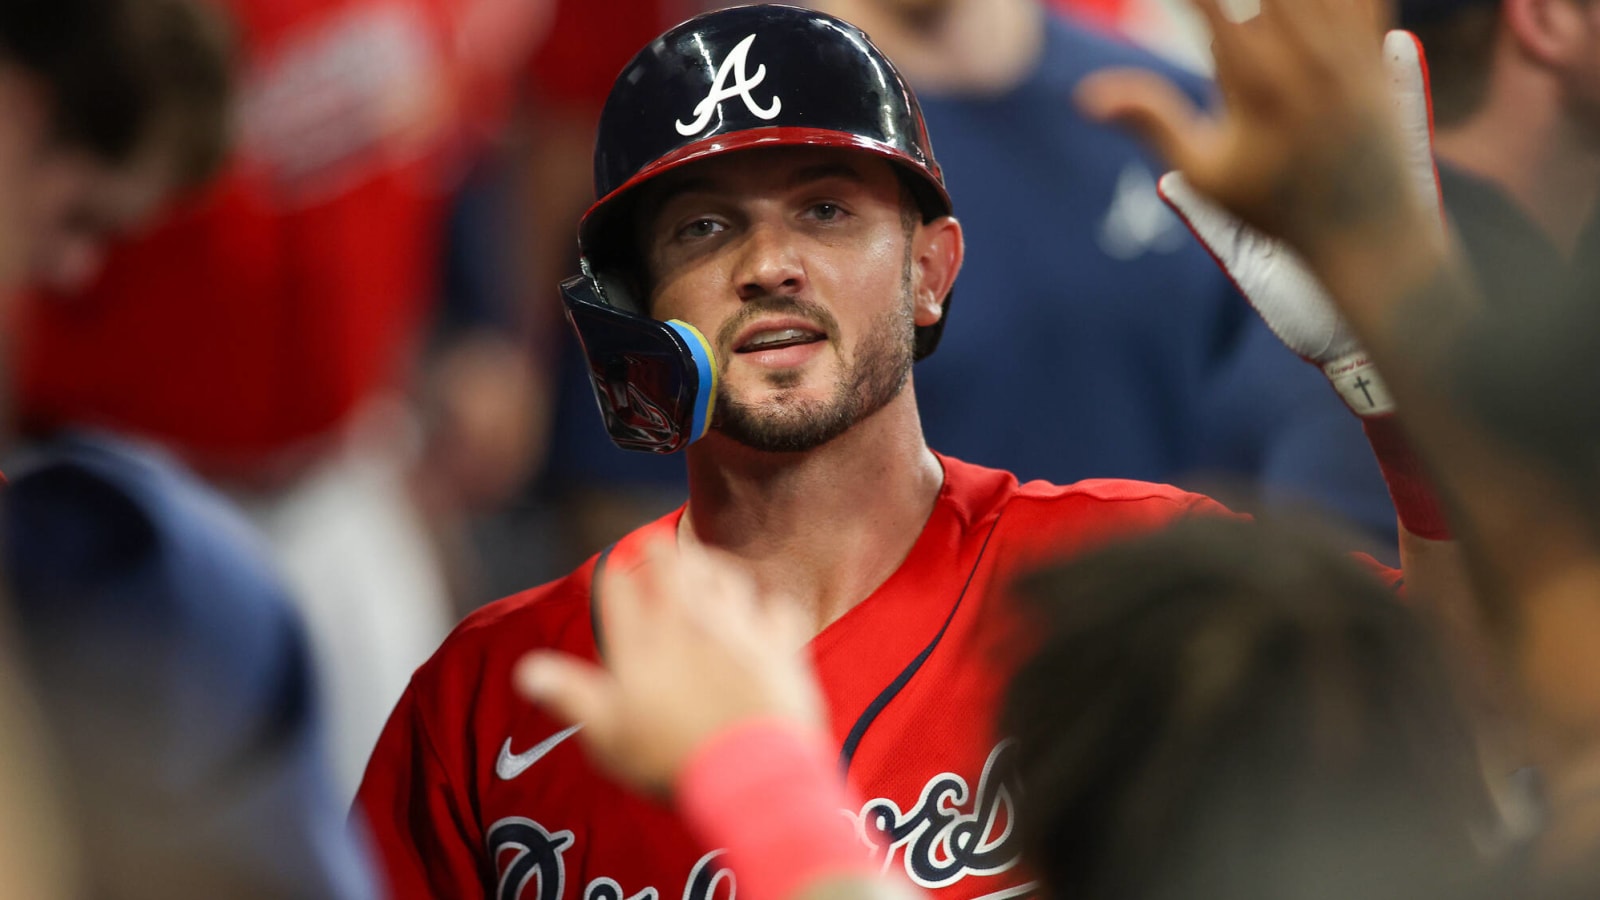 Forrest Wall making a case to be Braves 4th outfielder | Yardbarker